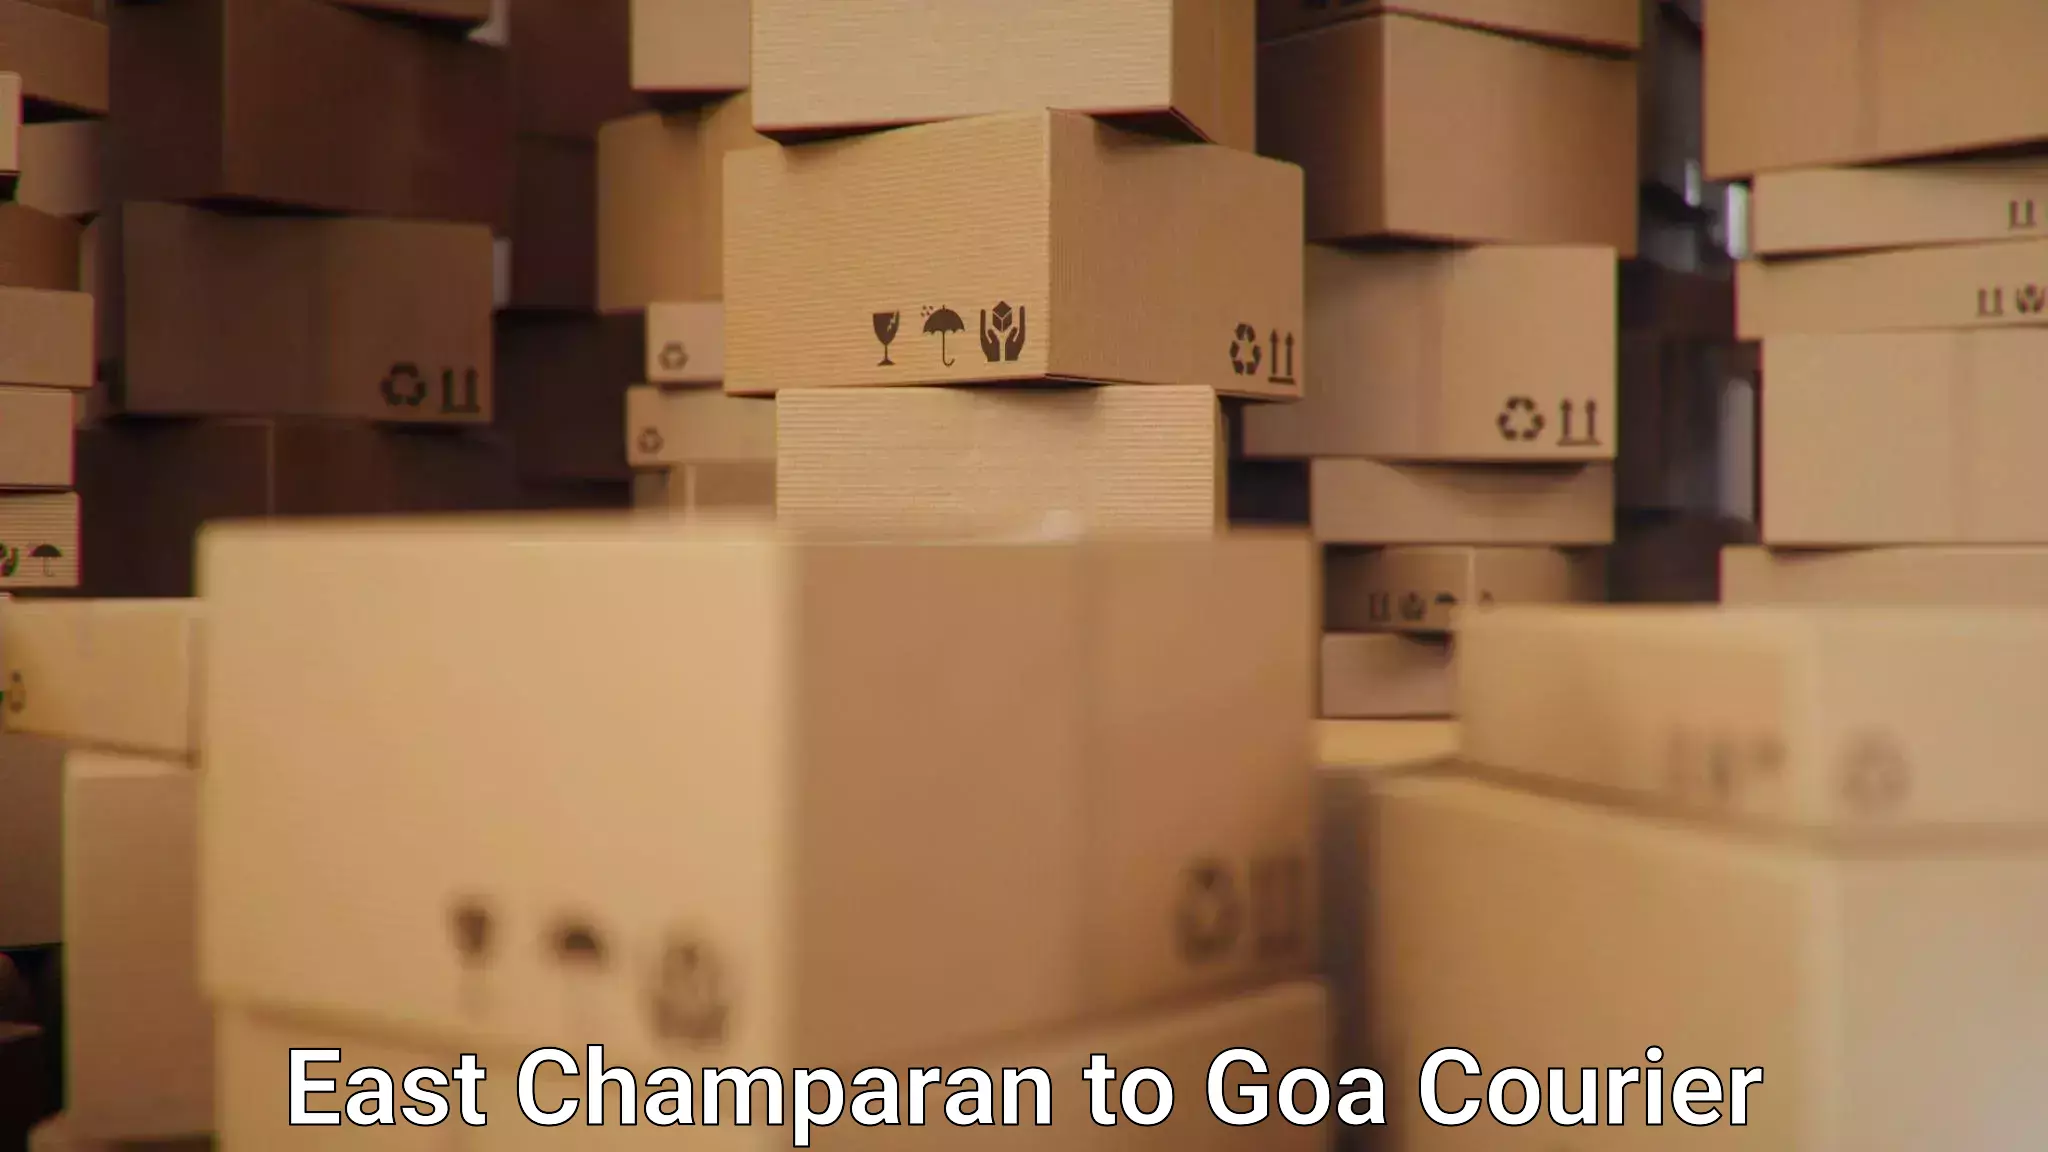 Business delivery service East Champaran to Goa